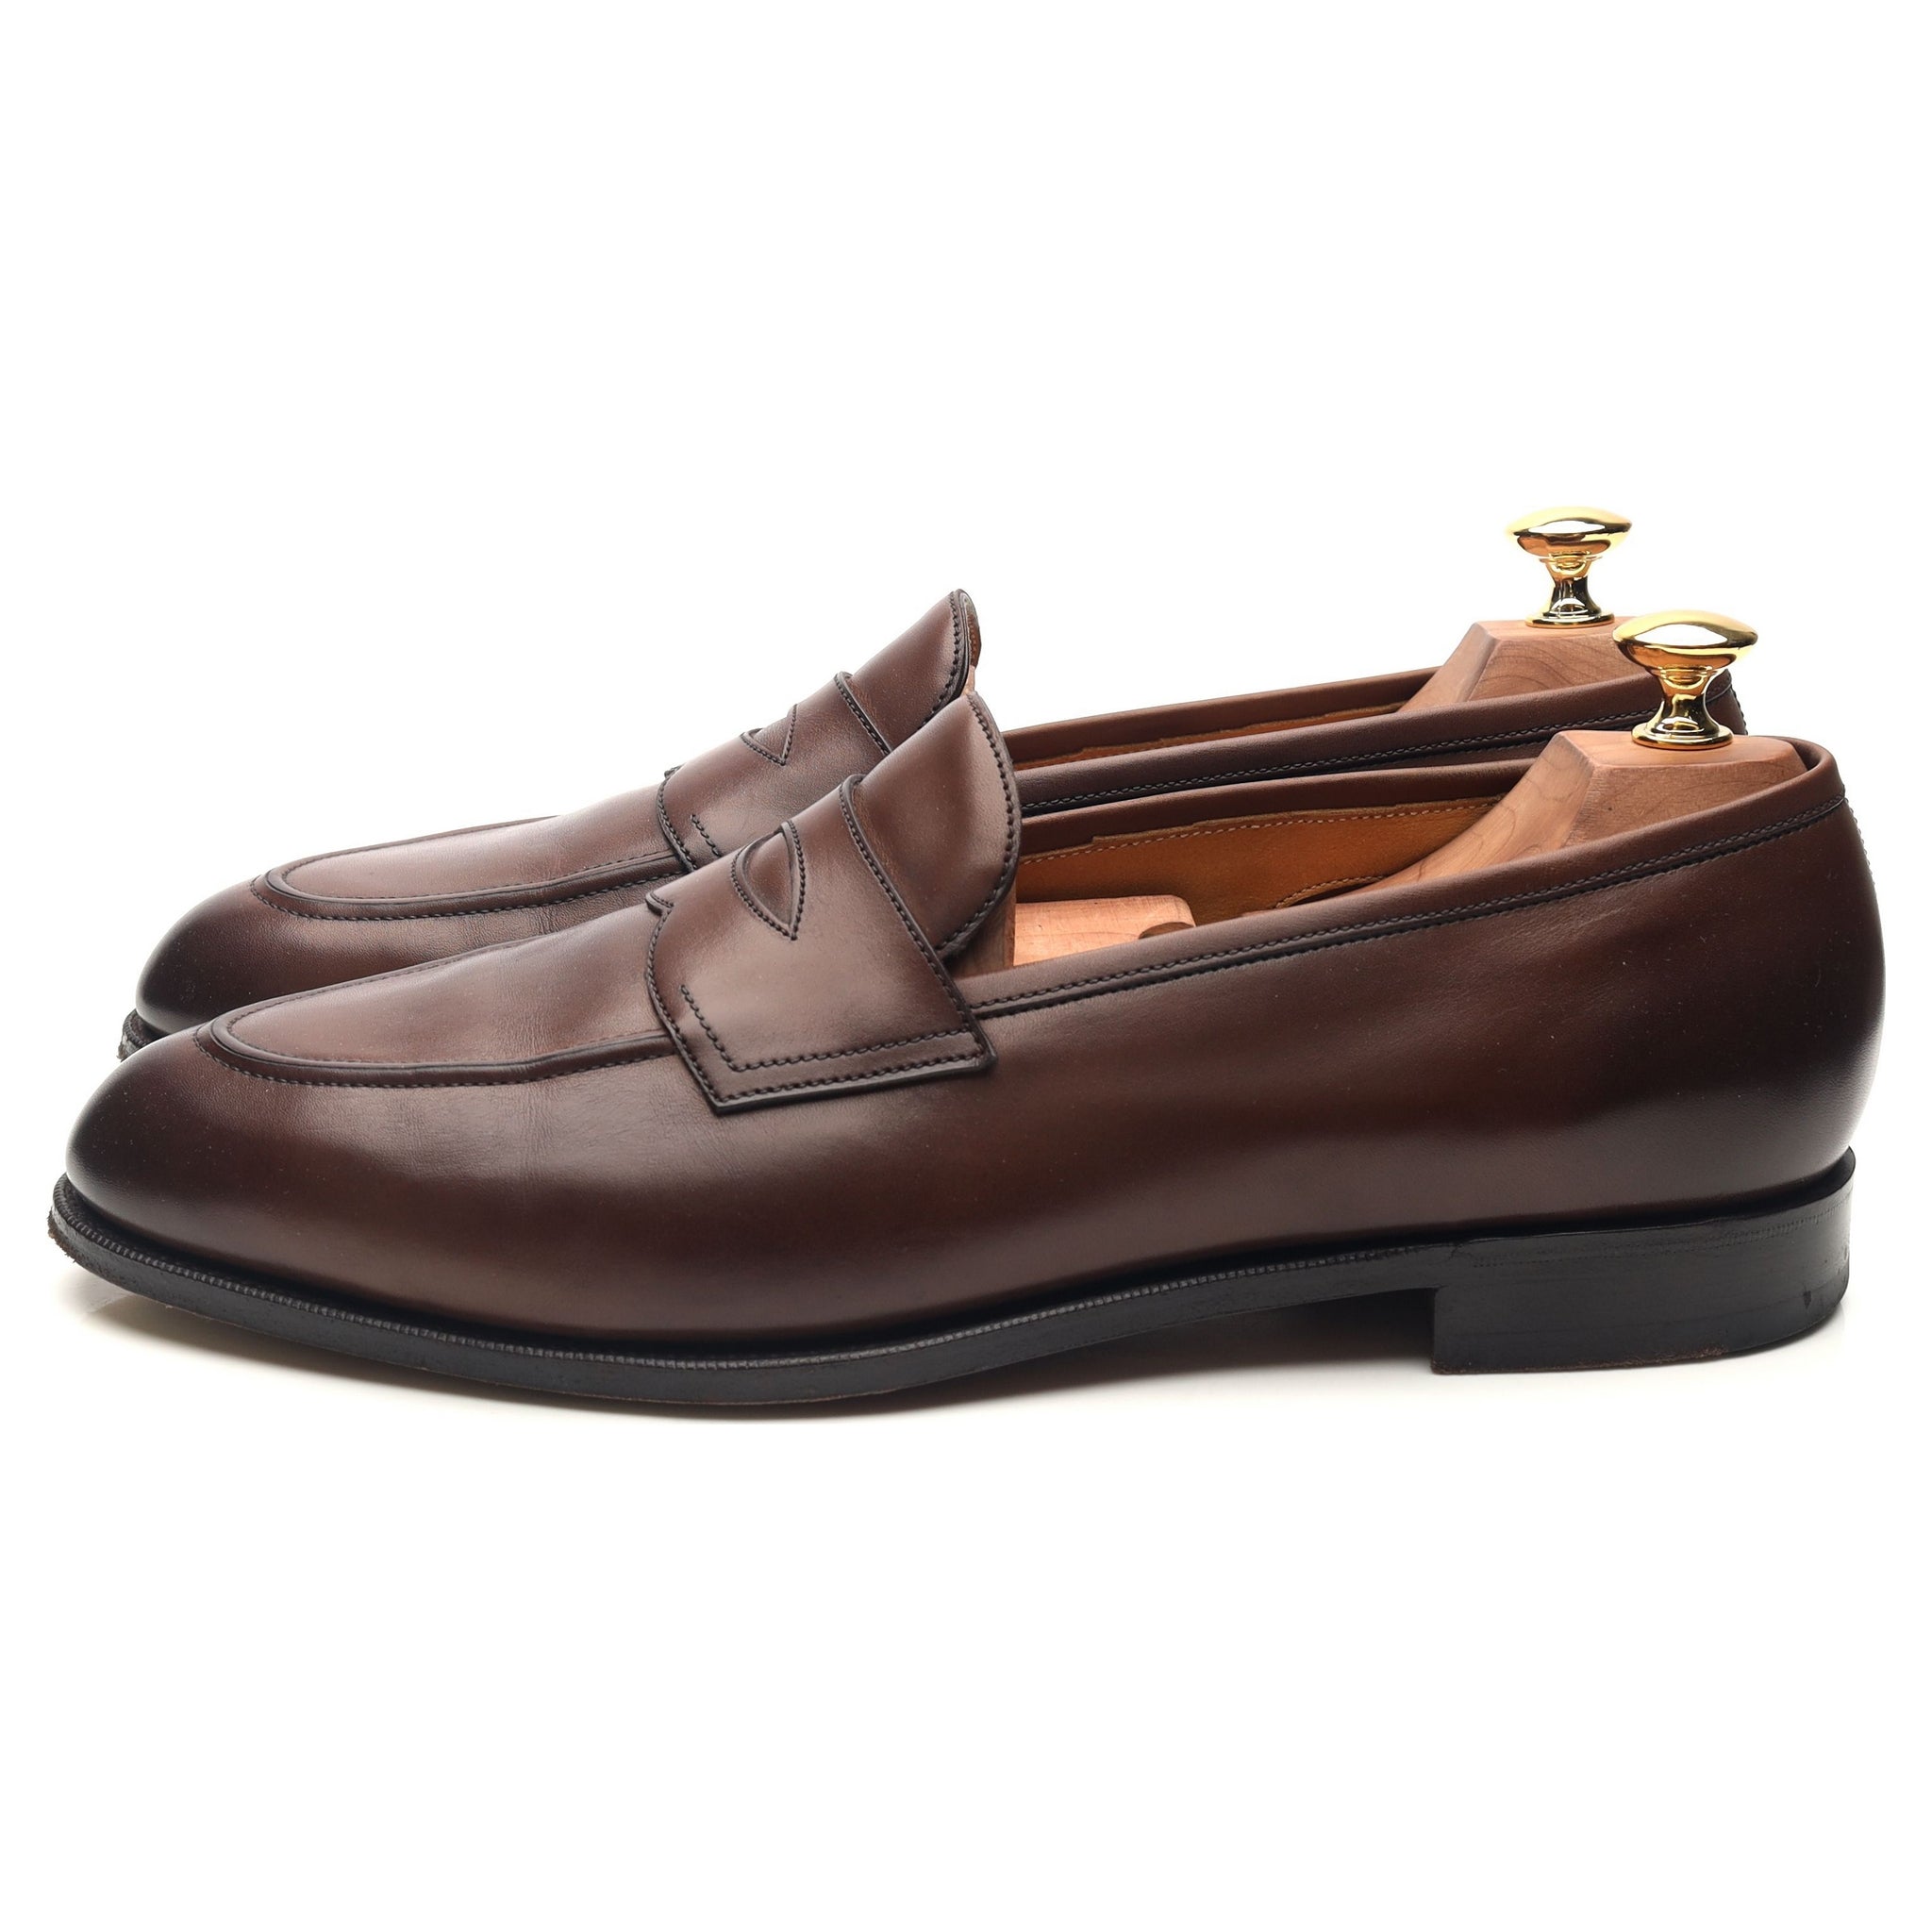 Piccadilly' Dark Brown Leather Loafers UK 9.5 E - Abbot's Shoes